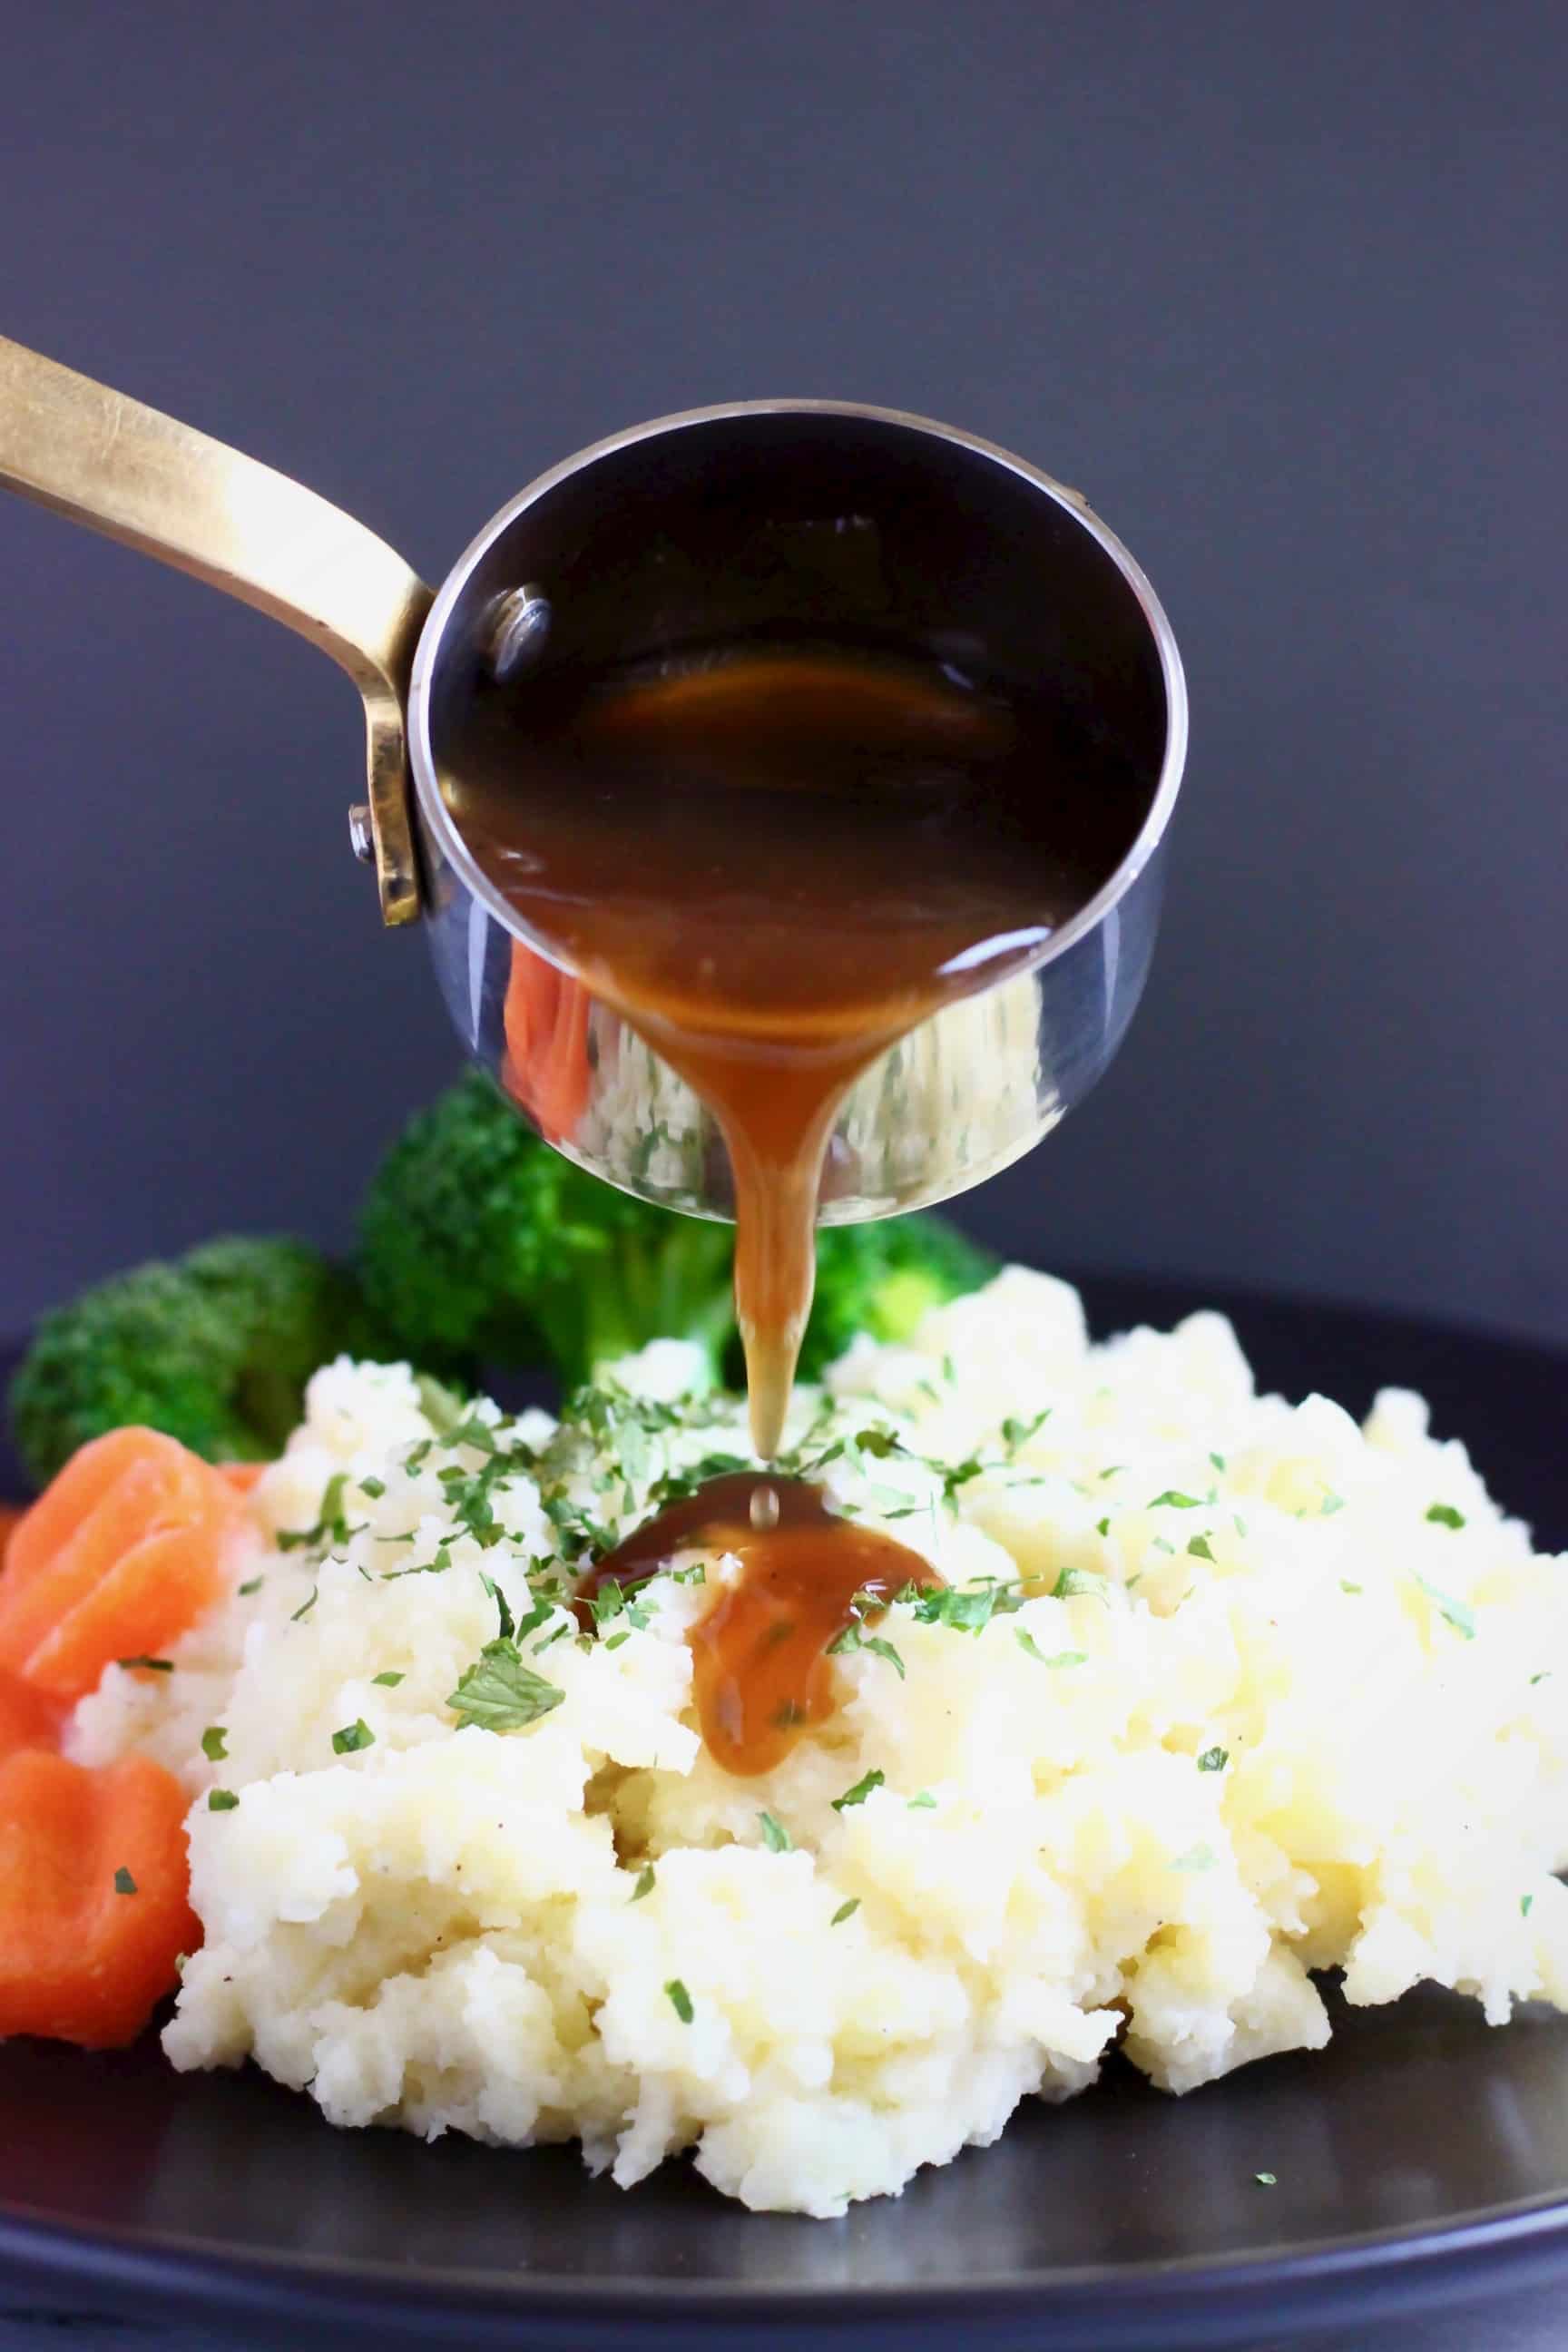 Photo of a pile of mashed potatoes topped with green herbs with sliced carrots and broccoli on a black plate with brown gravy being poured over in a silver saucepan against a dark grey background